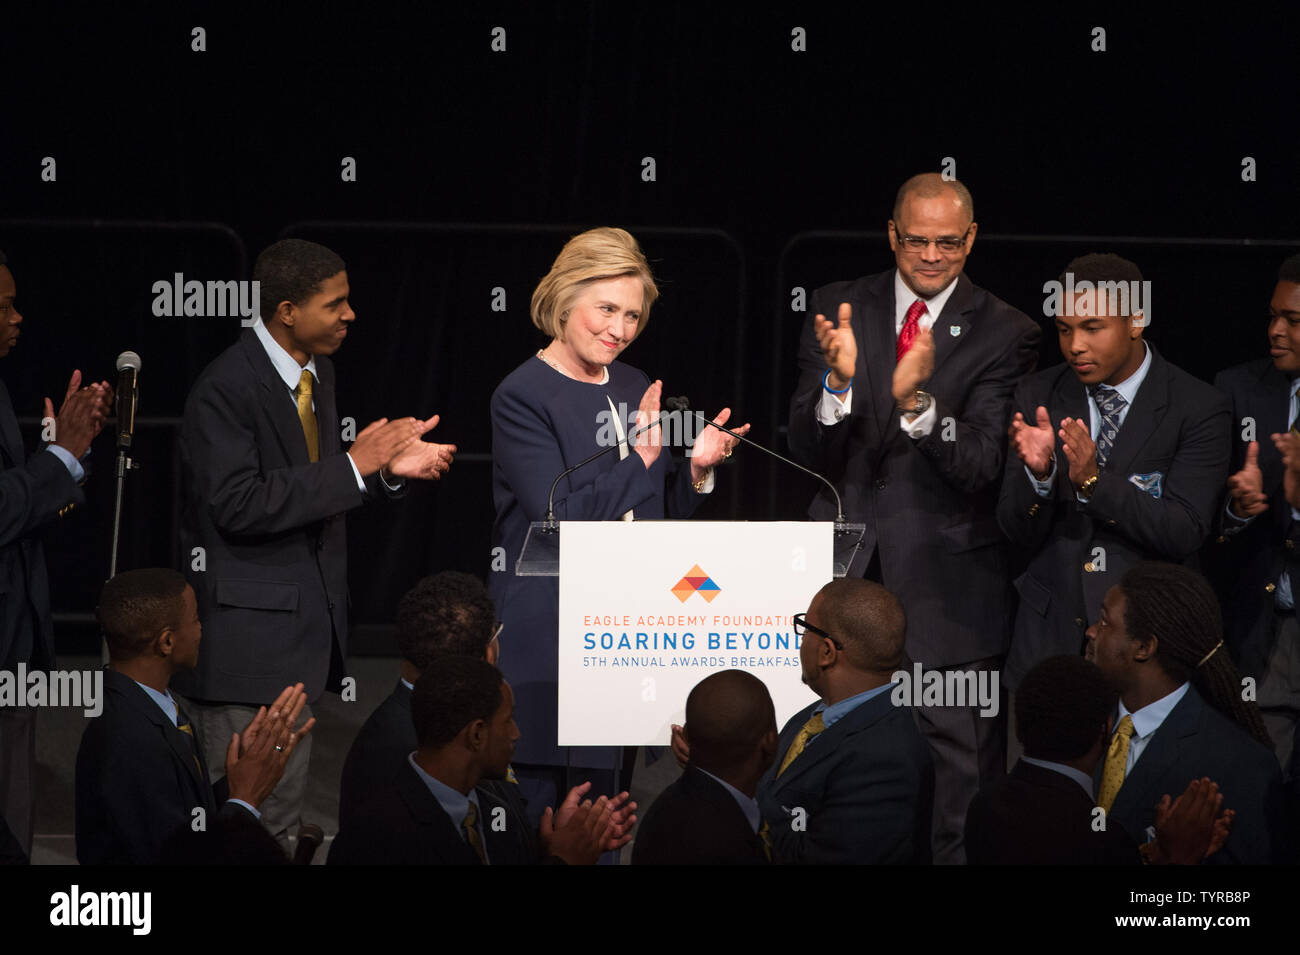 Former Secretary of State and current Democratic Presidential candidate Hillary Clinton applauds students at the Eagle Academy Foundation's annual fundraising breakfast titled ÒSoaring BeyondÓ on April 29, 2016 at Gotham Hall in New York City.   Photo by Bryan R. Smith/UPI Stock Photo